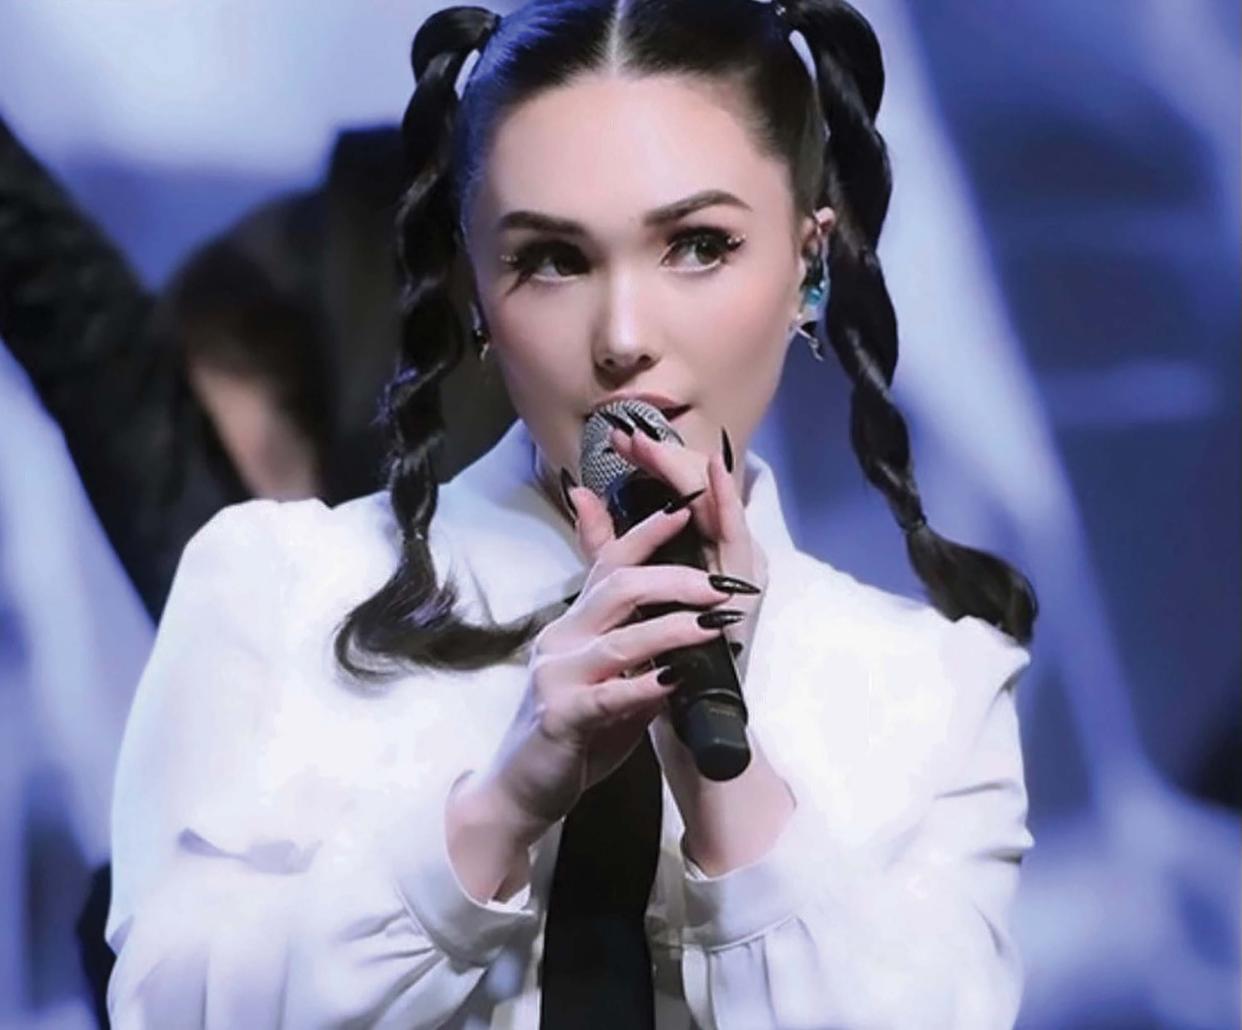 Lauren Frawley performing her song “Girl in the Mirror” in South Korea during a show with Hong Jin-young in December 2022.